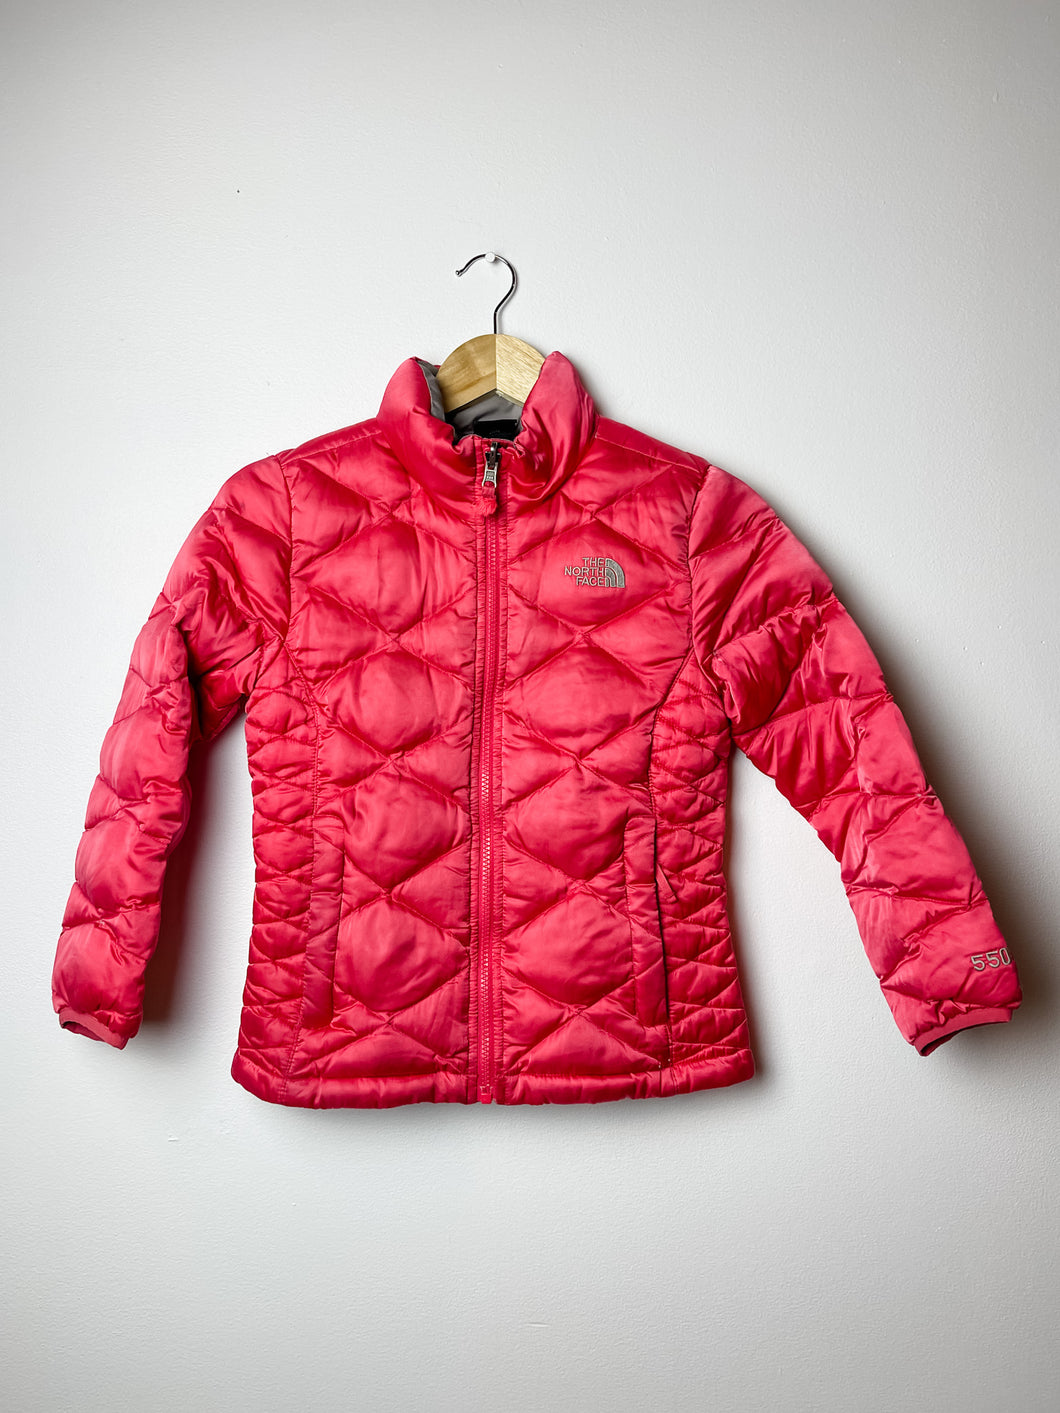 Dark Pink The North Face Puffer Coat Size 7/8